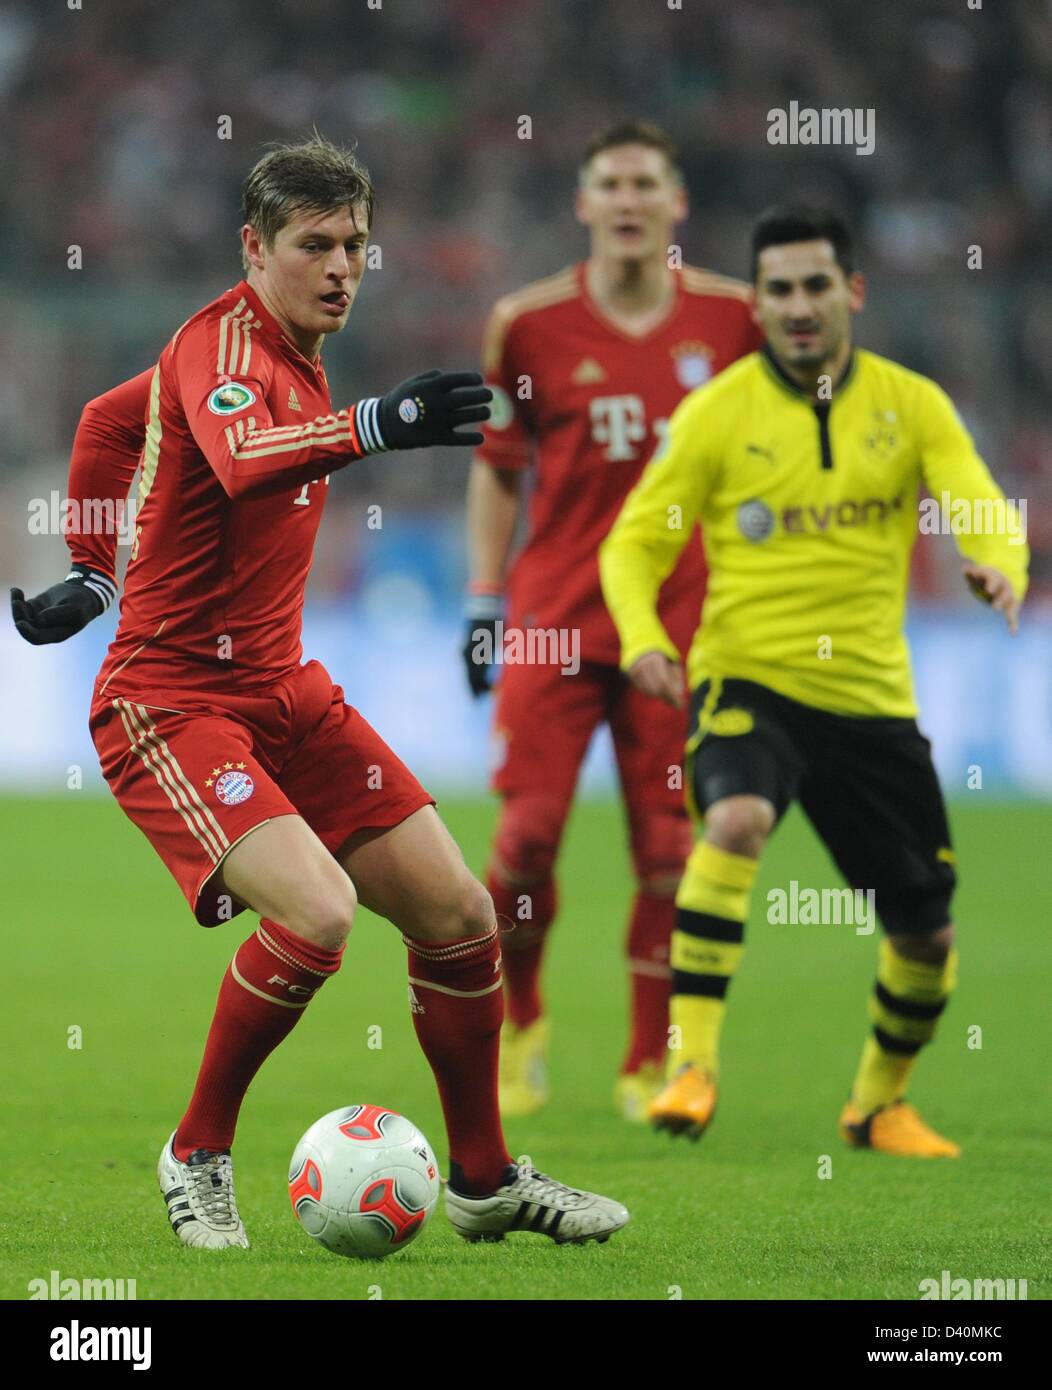 Munich's Toni Kroos kicks the ball during the DFB Cup match between FC  Bayern Munich and Borussia Dortmund at Allianz Arena in Dortmund, Germany,  27 February 2013. Photo: ANDREAS GEBERT Stock Photo - Alamy